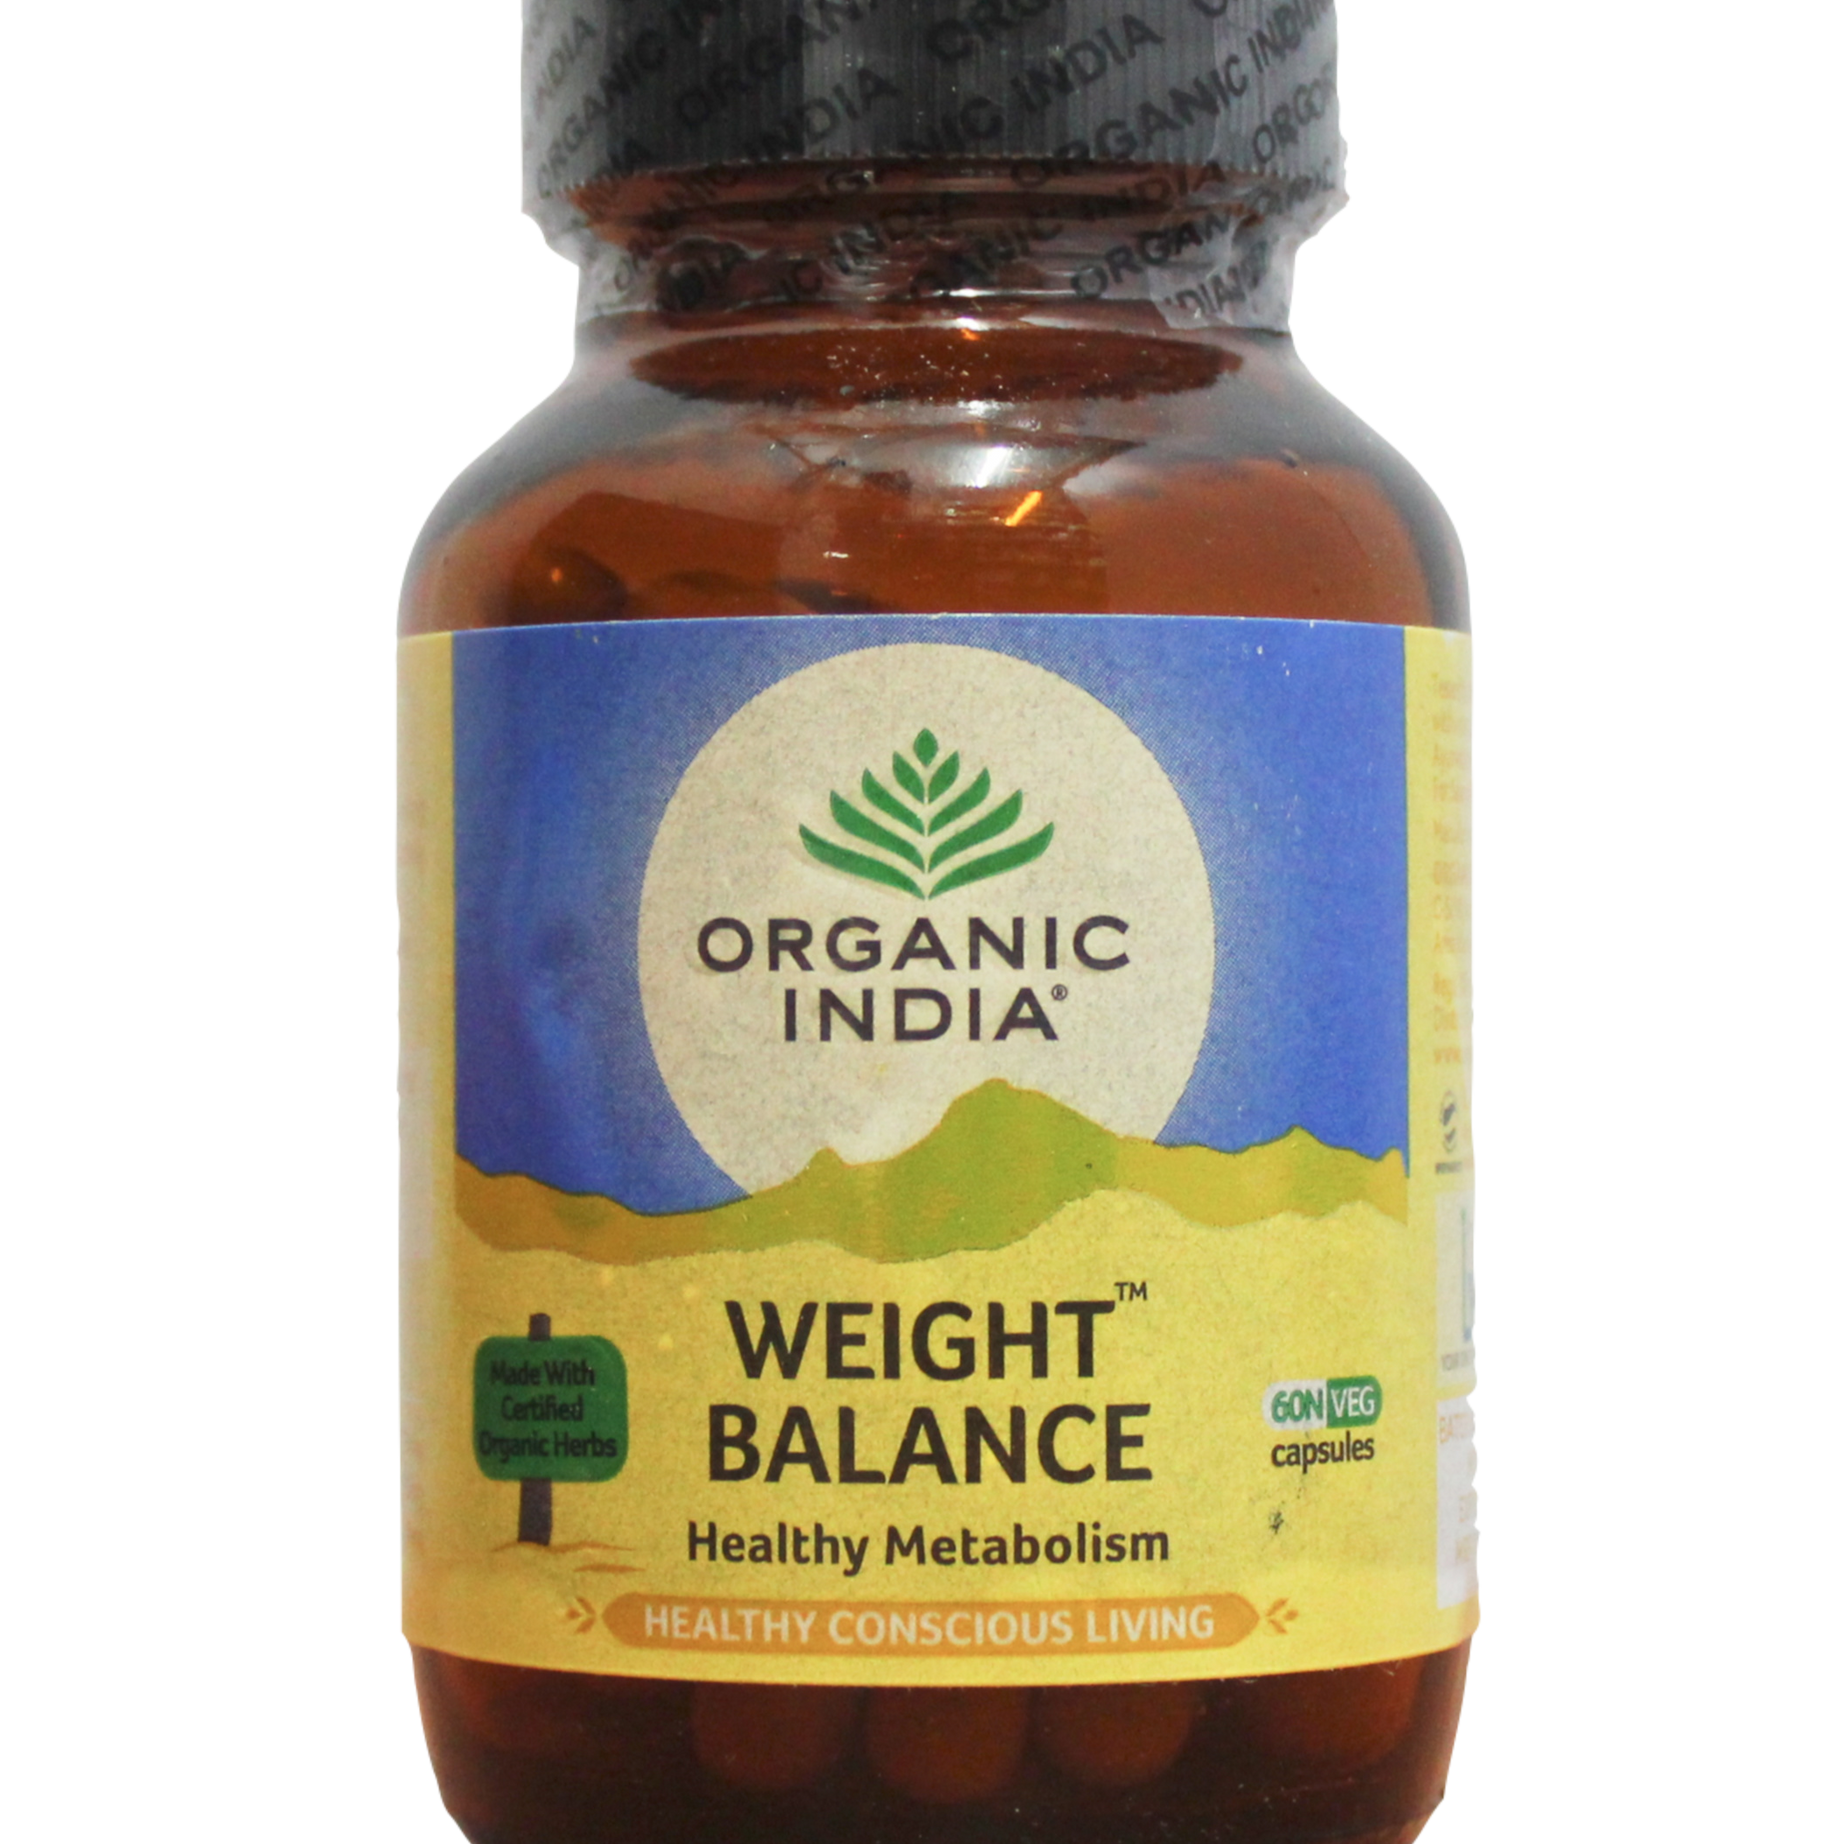 Shop Weight balance 60capsules at price 225.00 from Organic India Online - Ayush Care